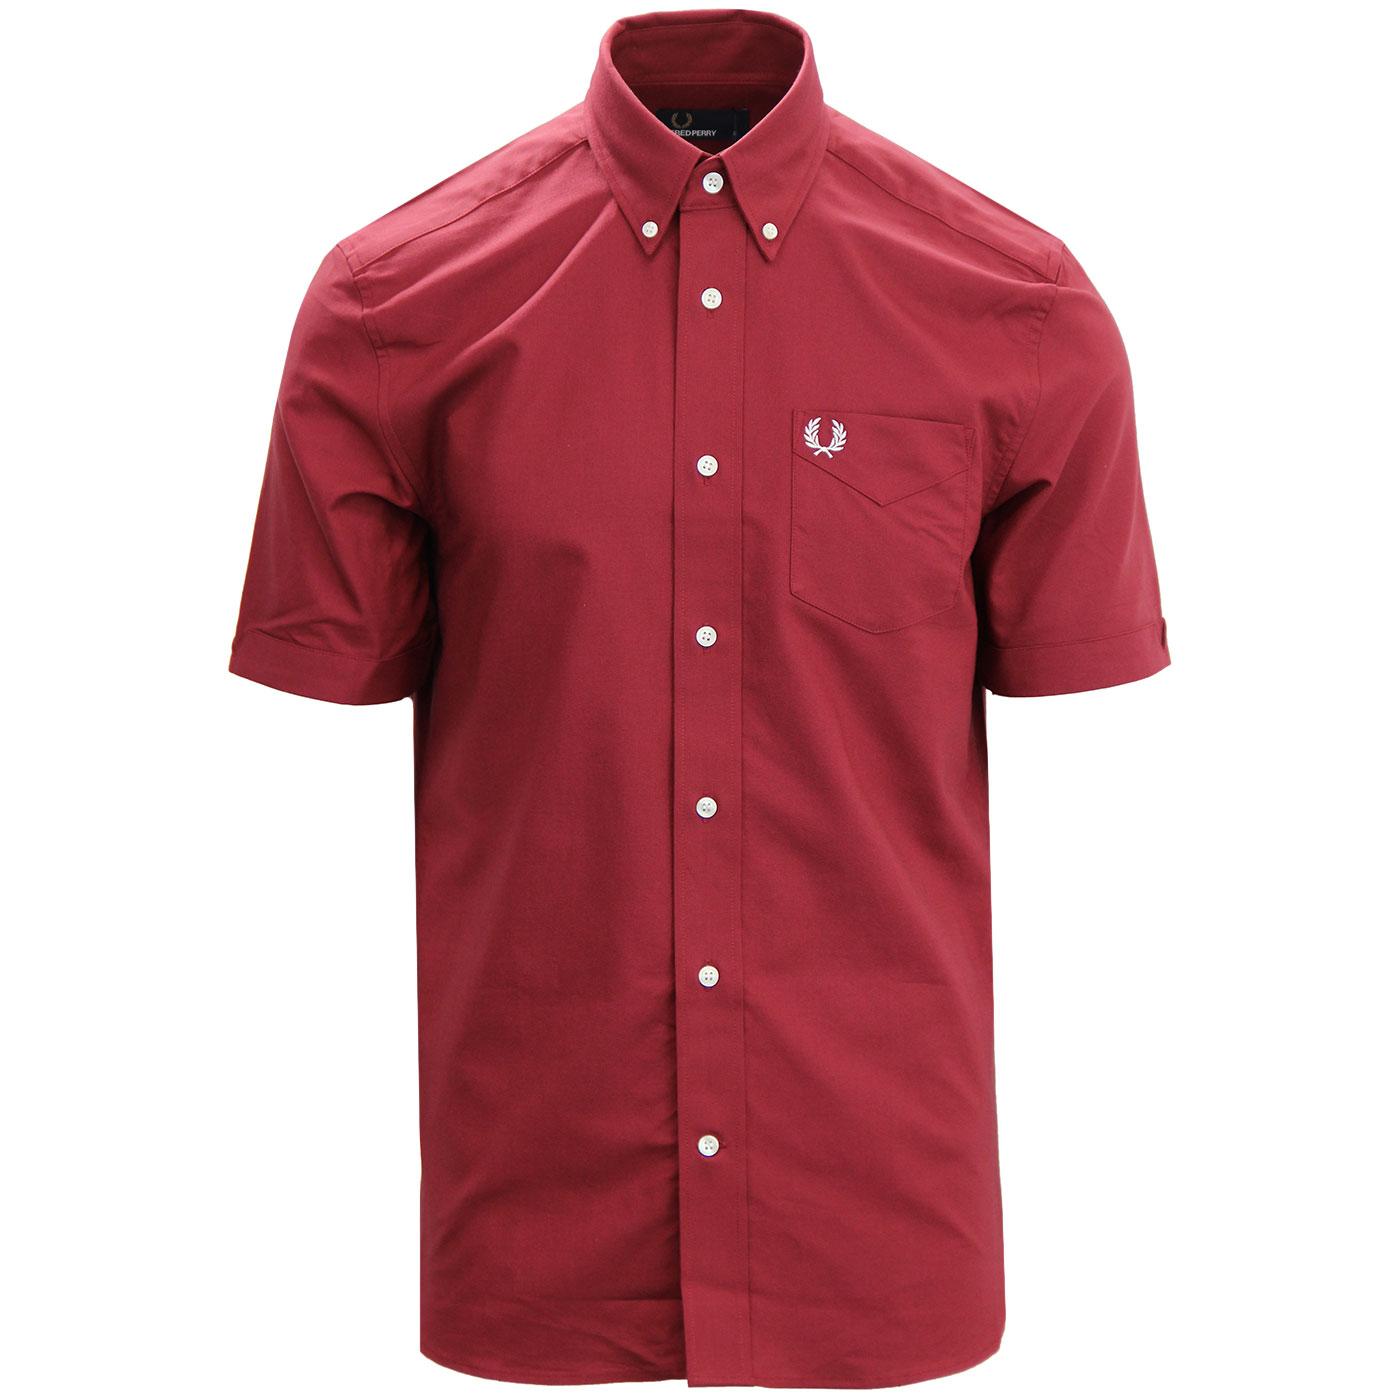 FRED PERRY Retro Mod Classic Oxford Shirt MAROON